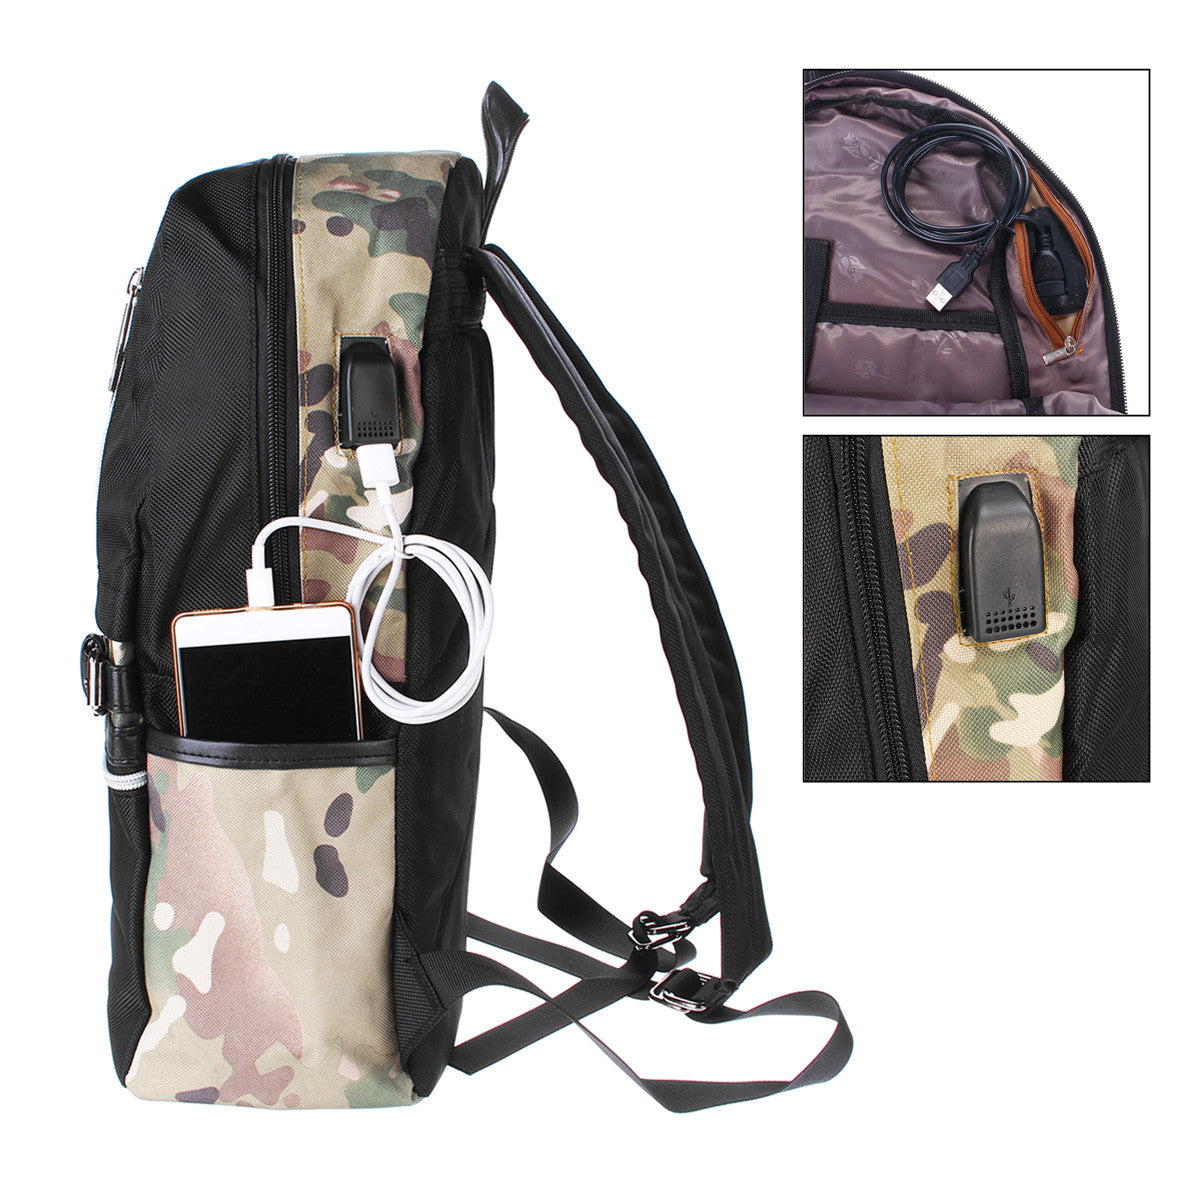 29.5x12.5x43.5cm Anti Theft Waterproof Backpack With USB Charging Port Outdoor Travel Fishing Bag